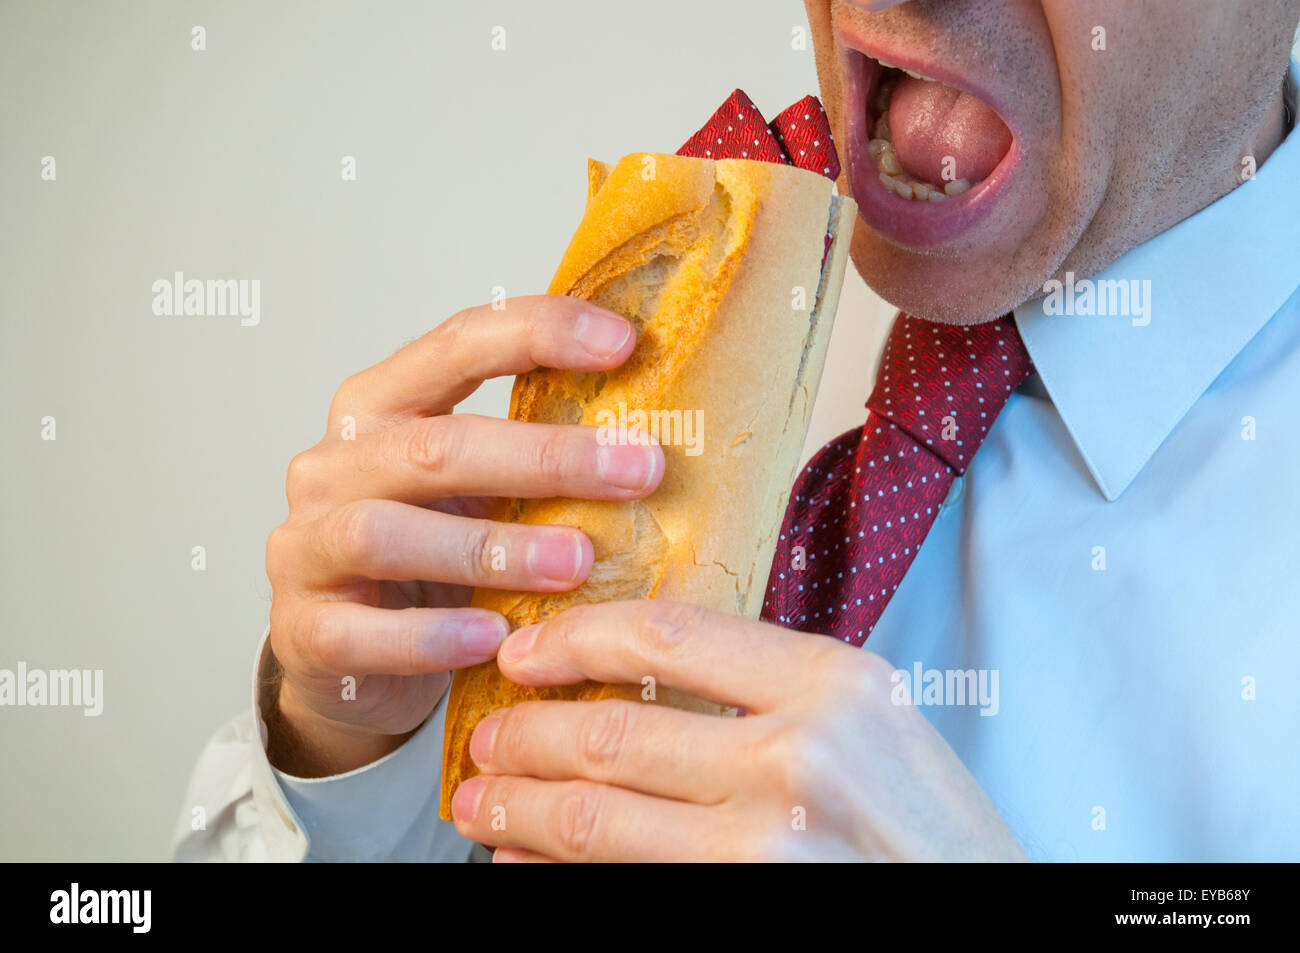 Man eating a sandwich made of his own tie. Stock Photo